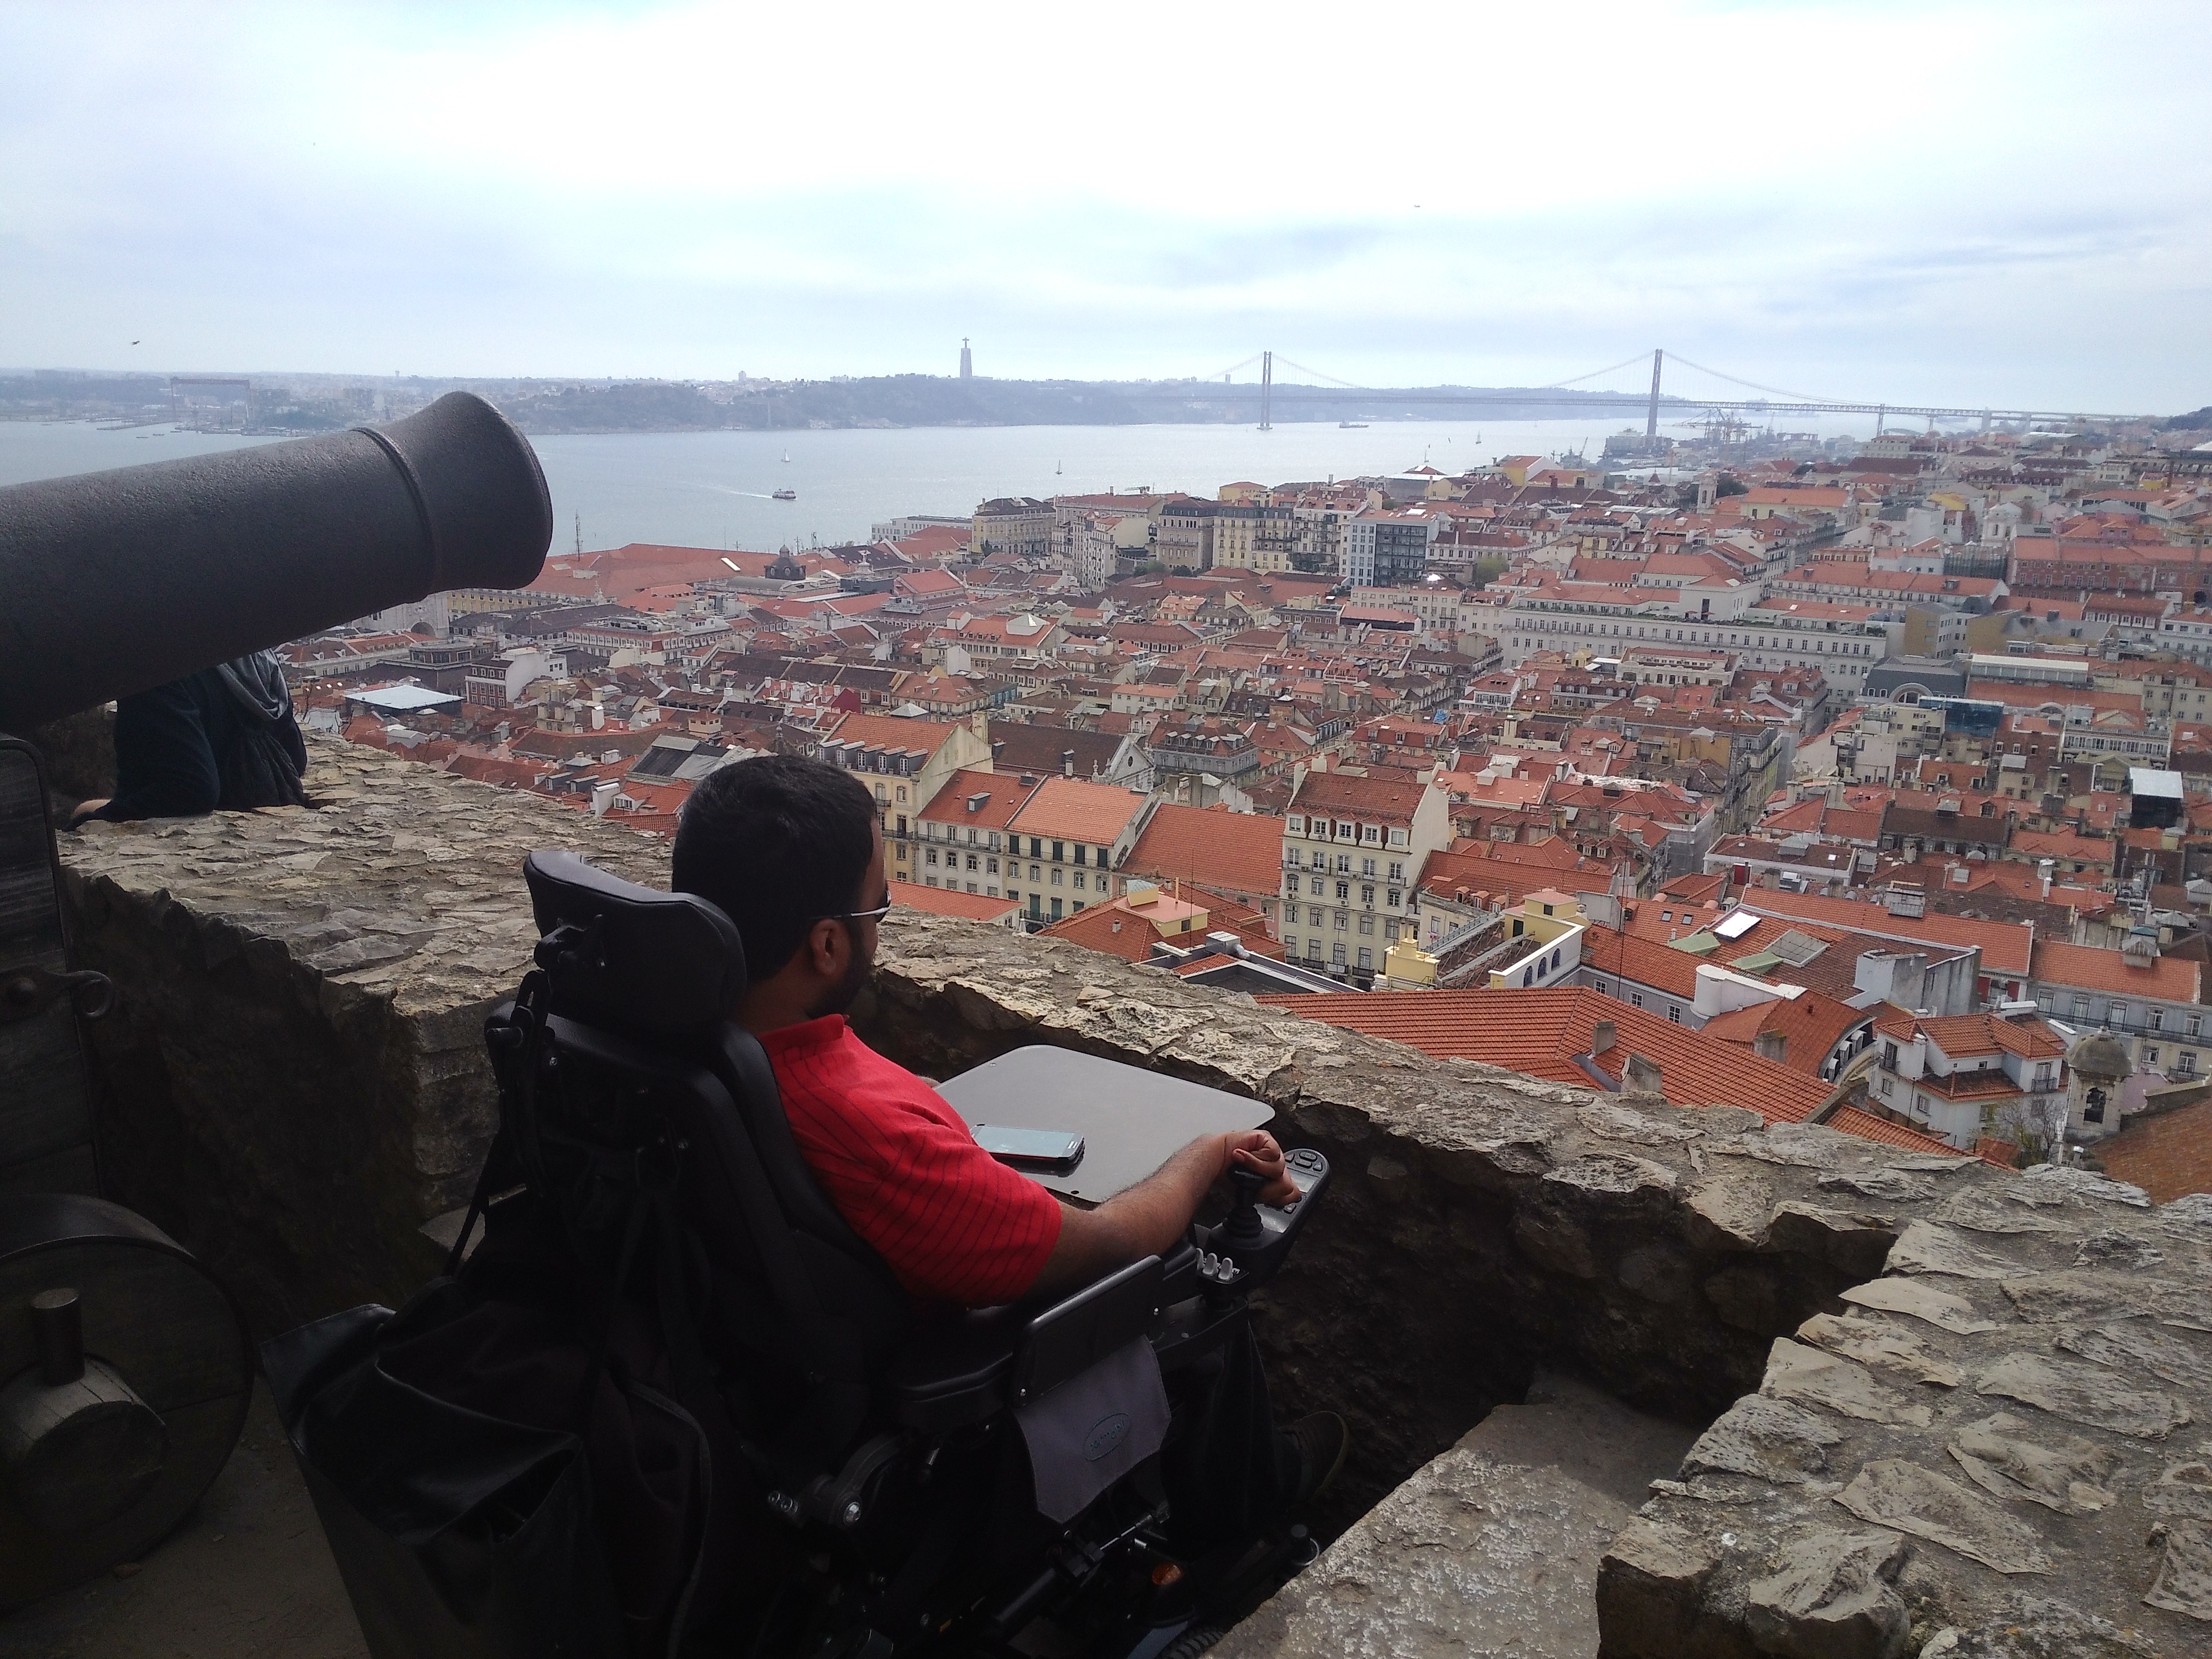 Looking out over Lisbon from the São Jorge Castle.